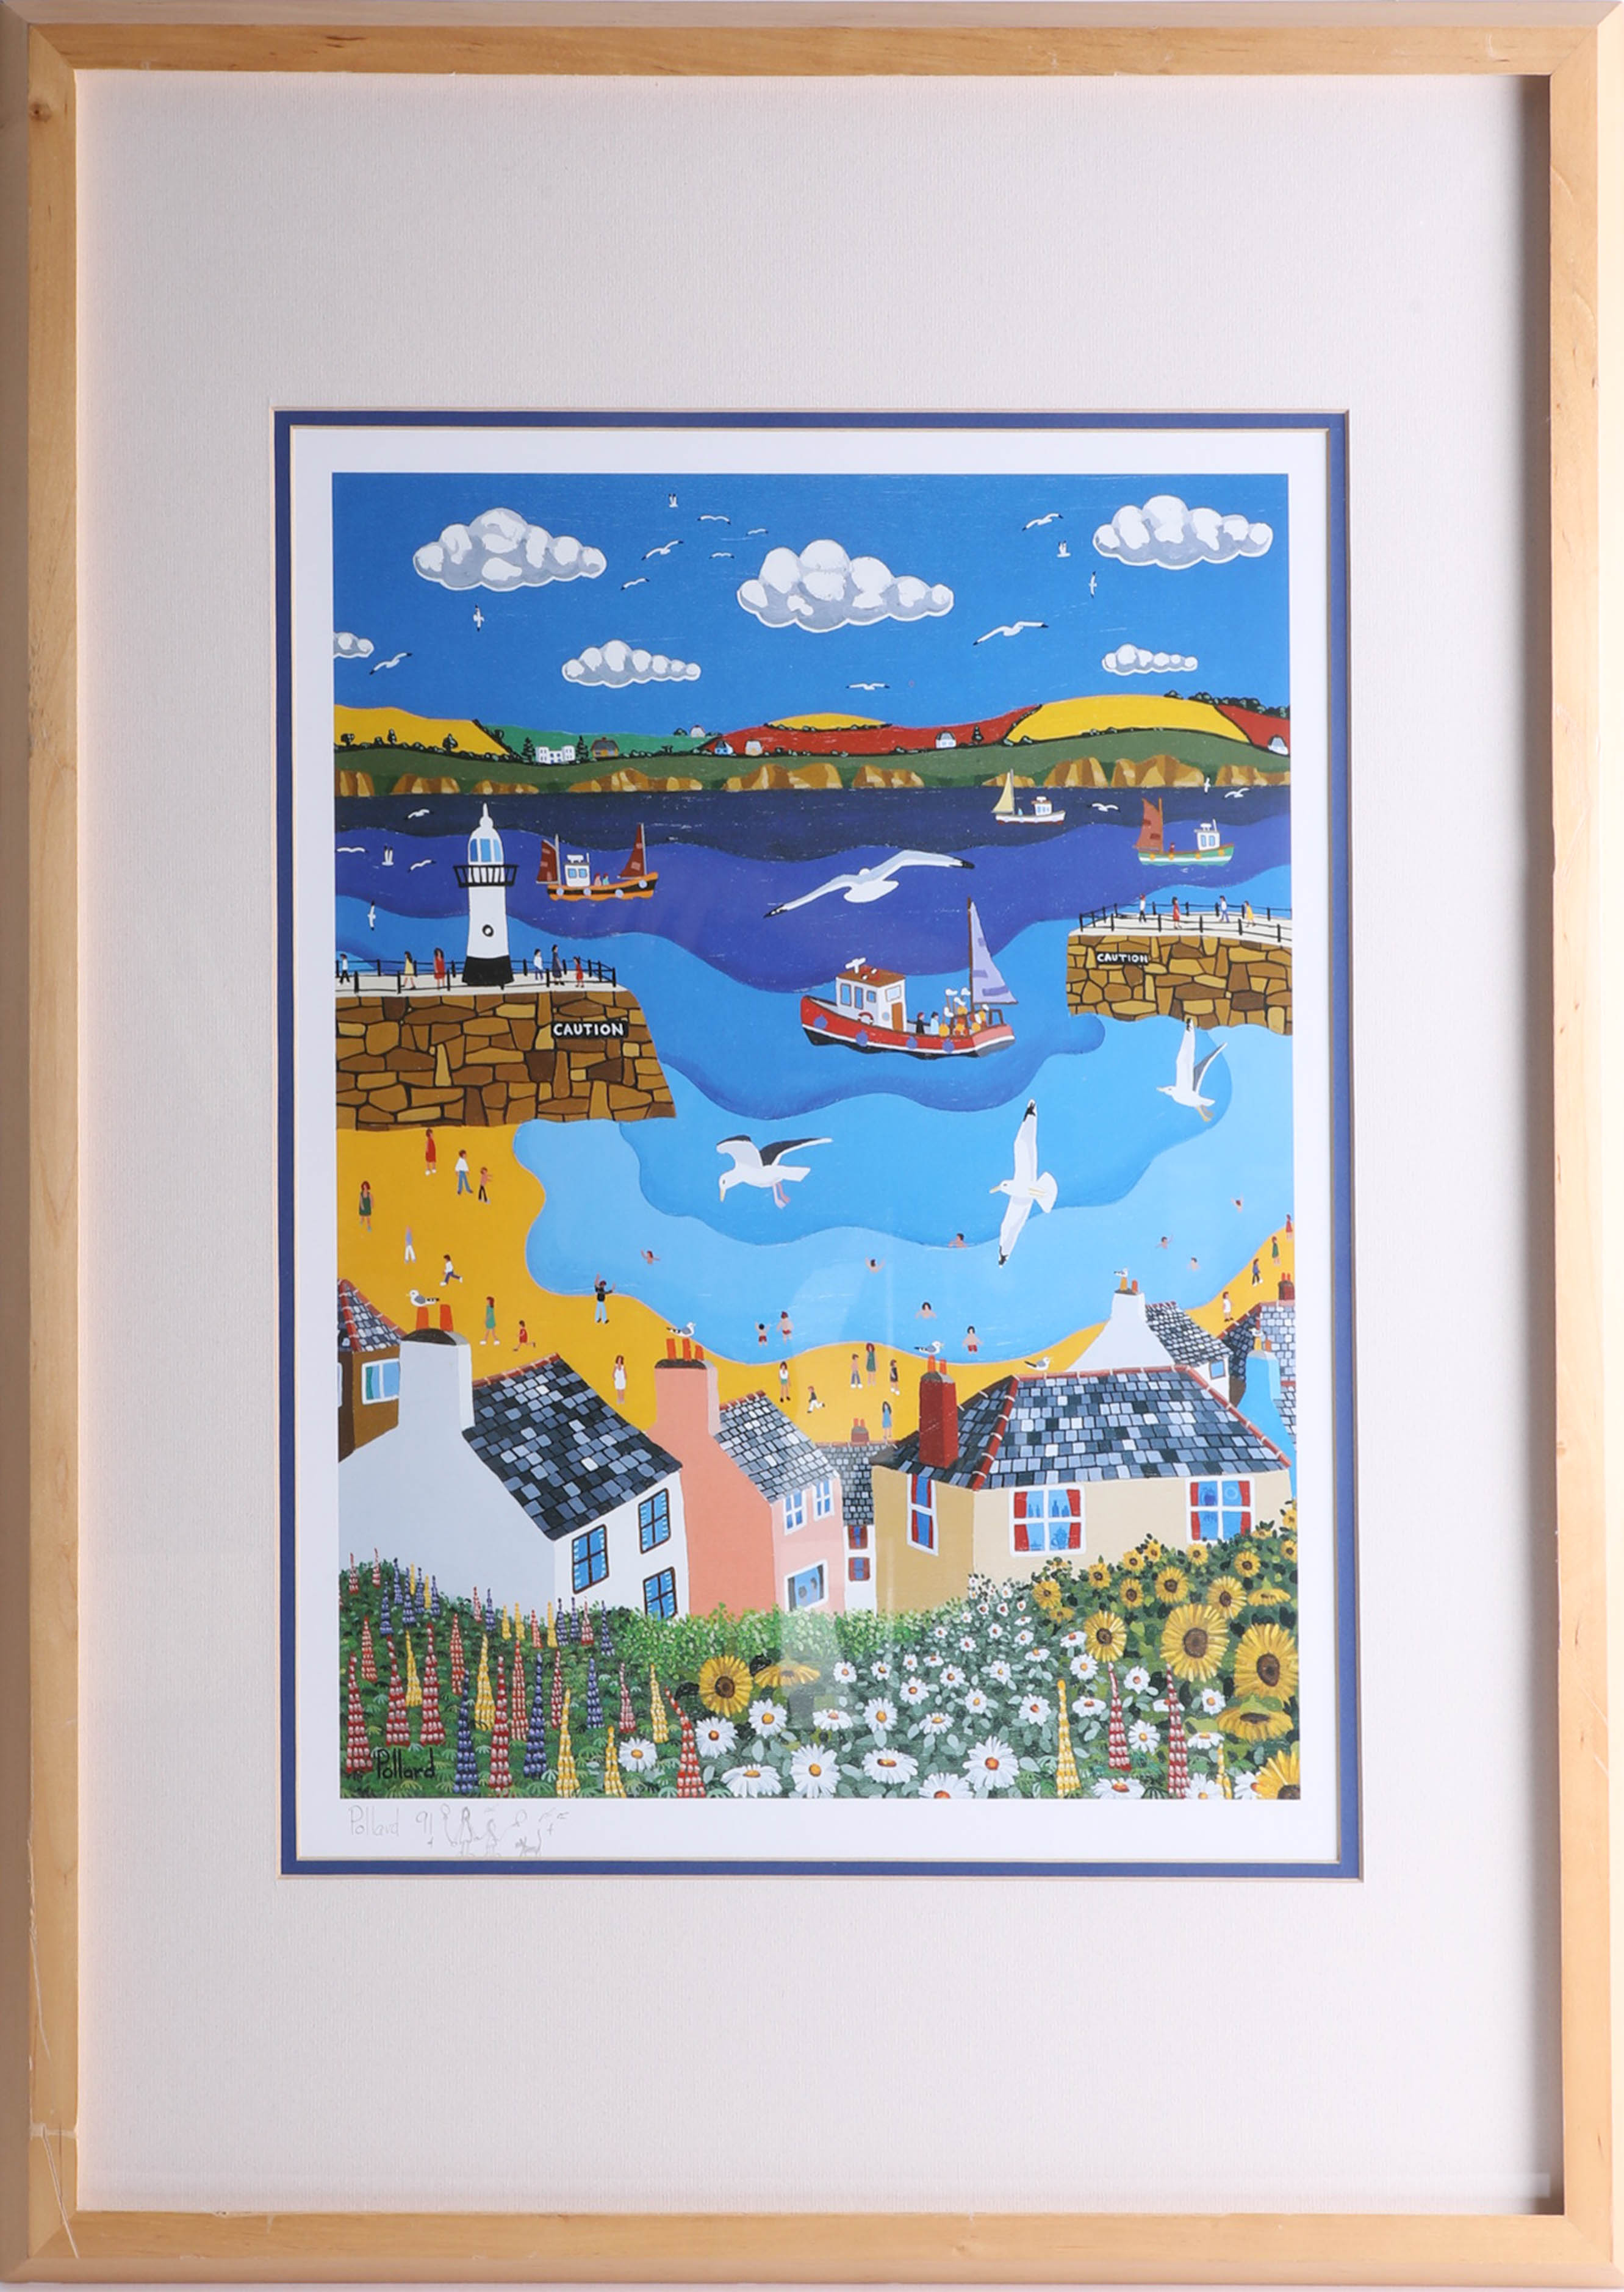 Brian Pollard open print, 'Mousehole', with remarque, signed, framed and glazed, 42cm x 30cm. - Image 2 of 2